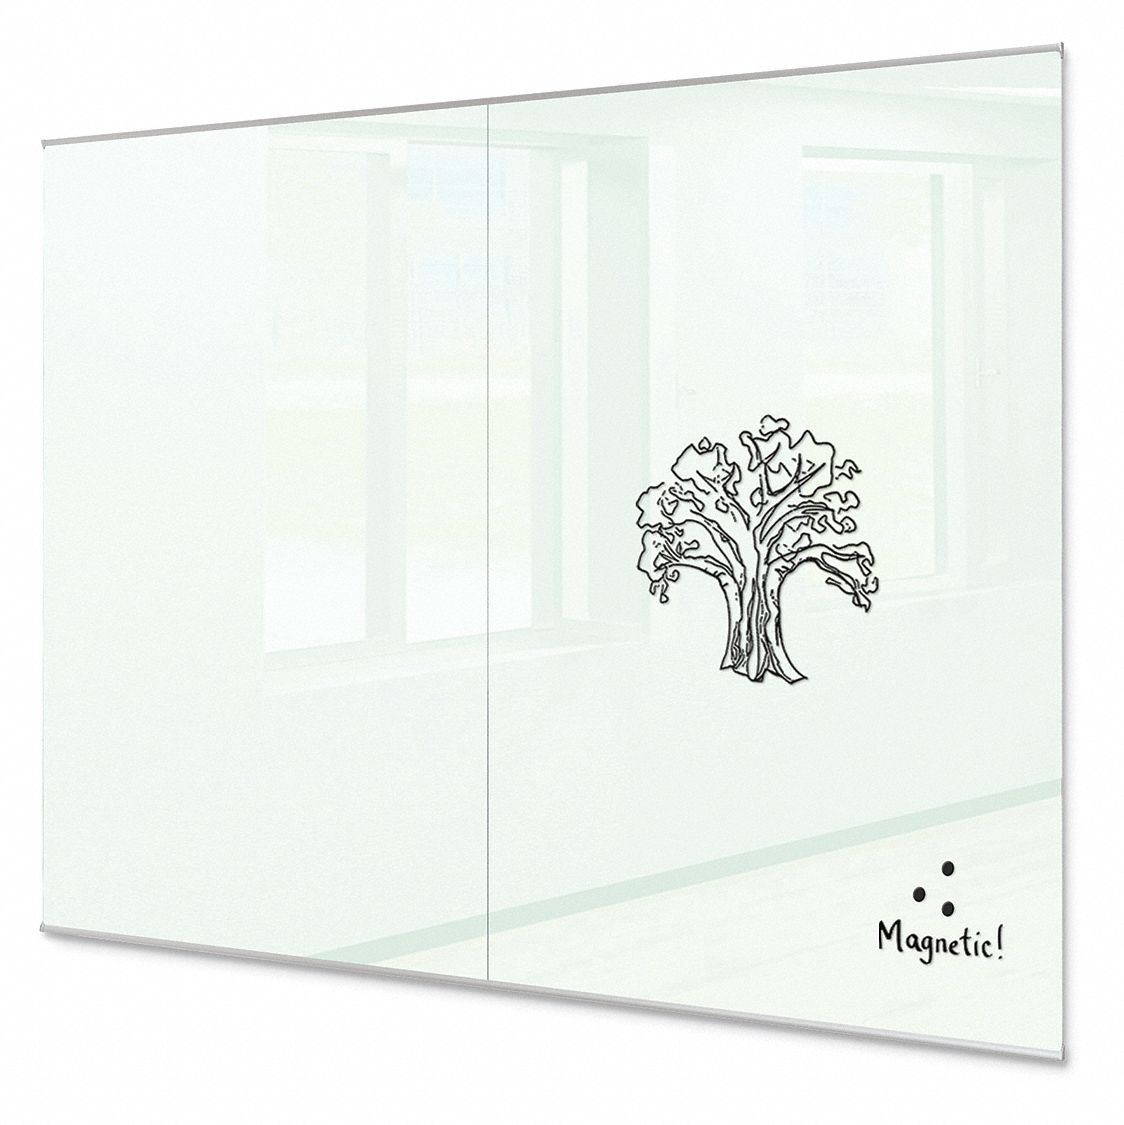 Dry Erase Board: Wall Mounted, 72 in Dry Erase Ht, 96 in Dry Erase Wd, 1/4 in Dp, Silver, White